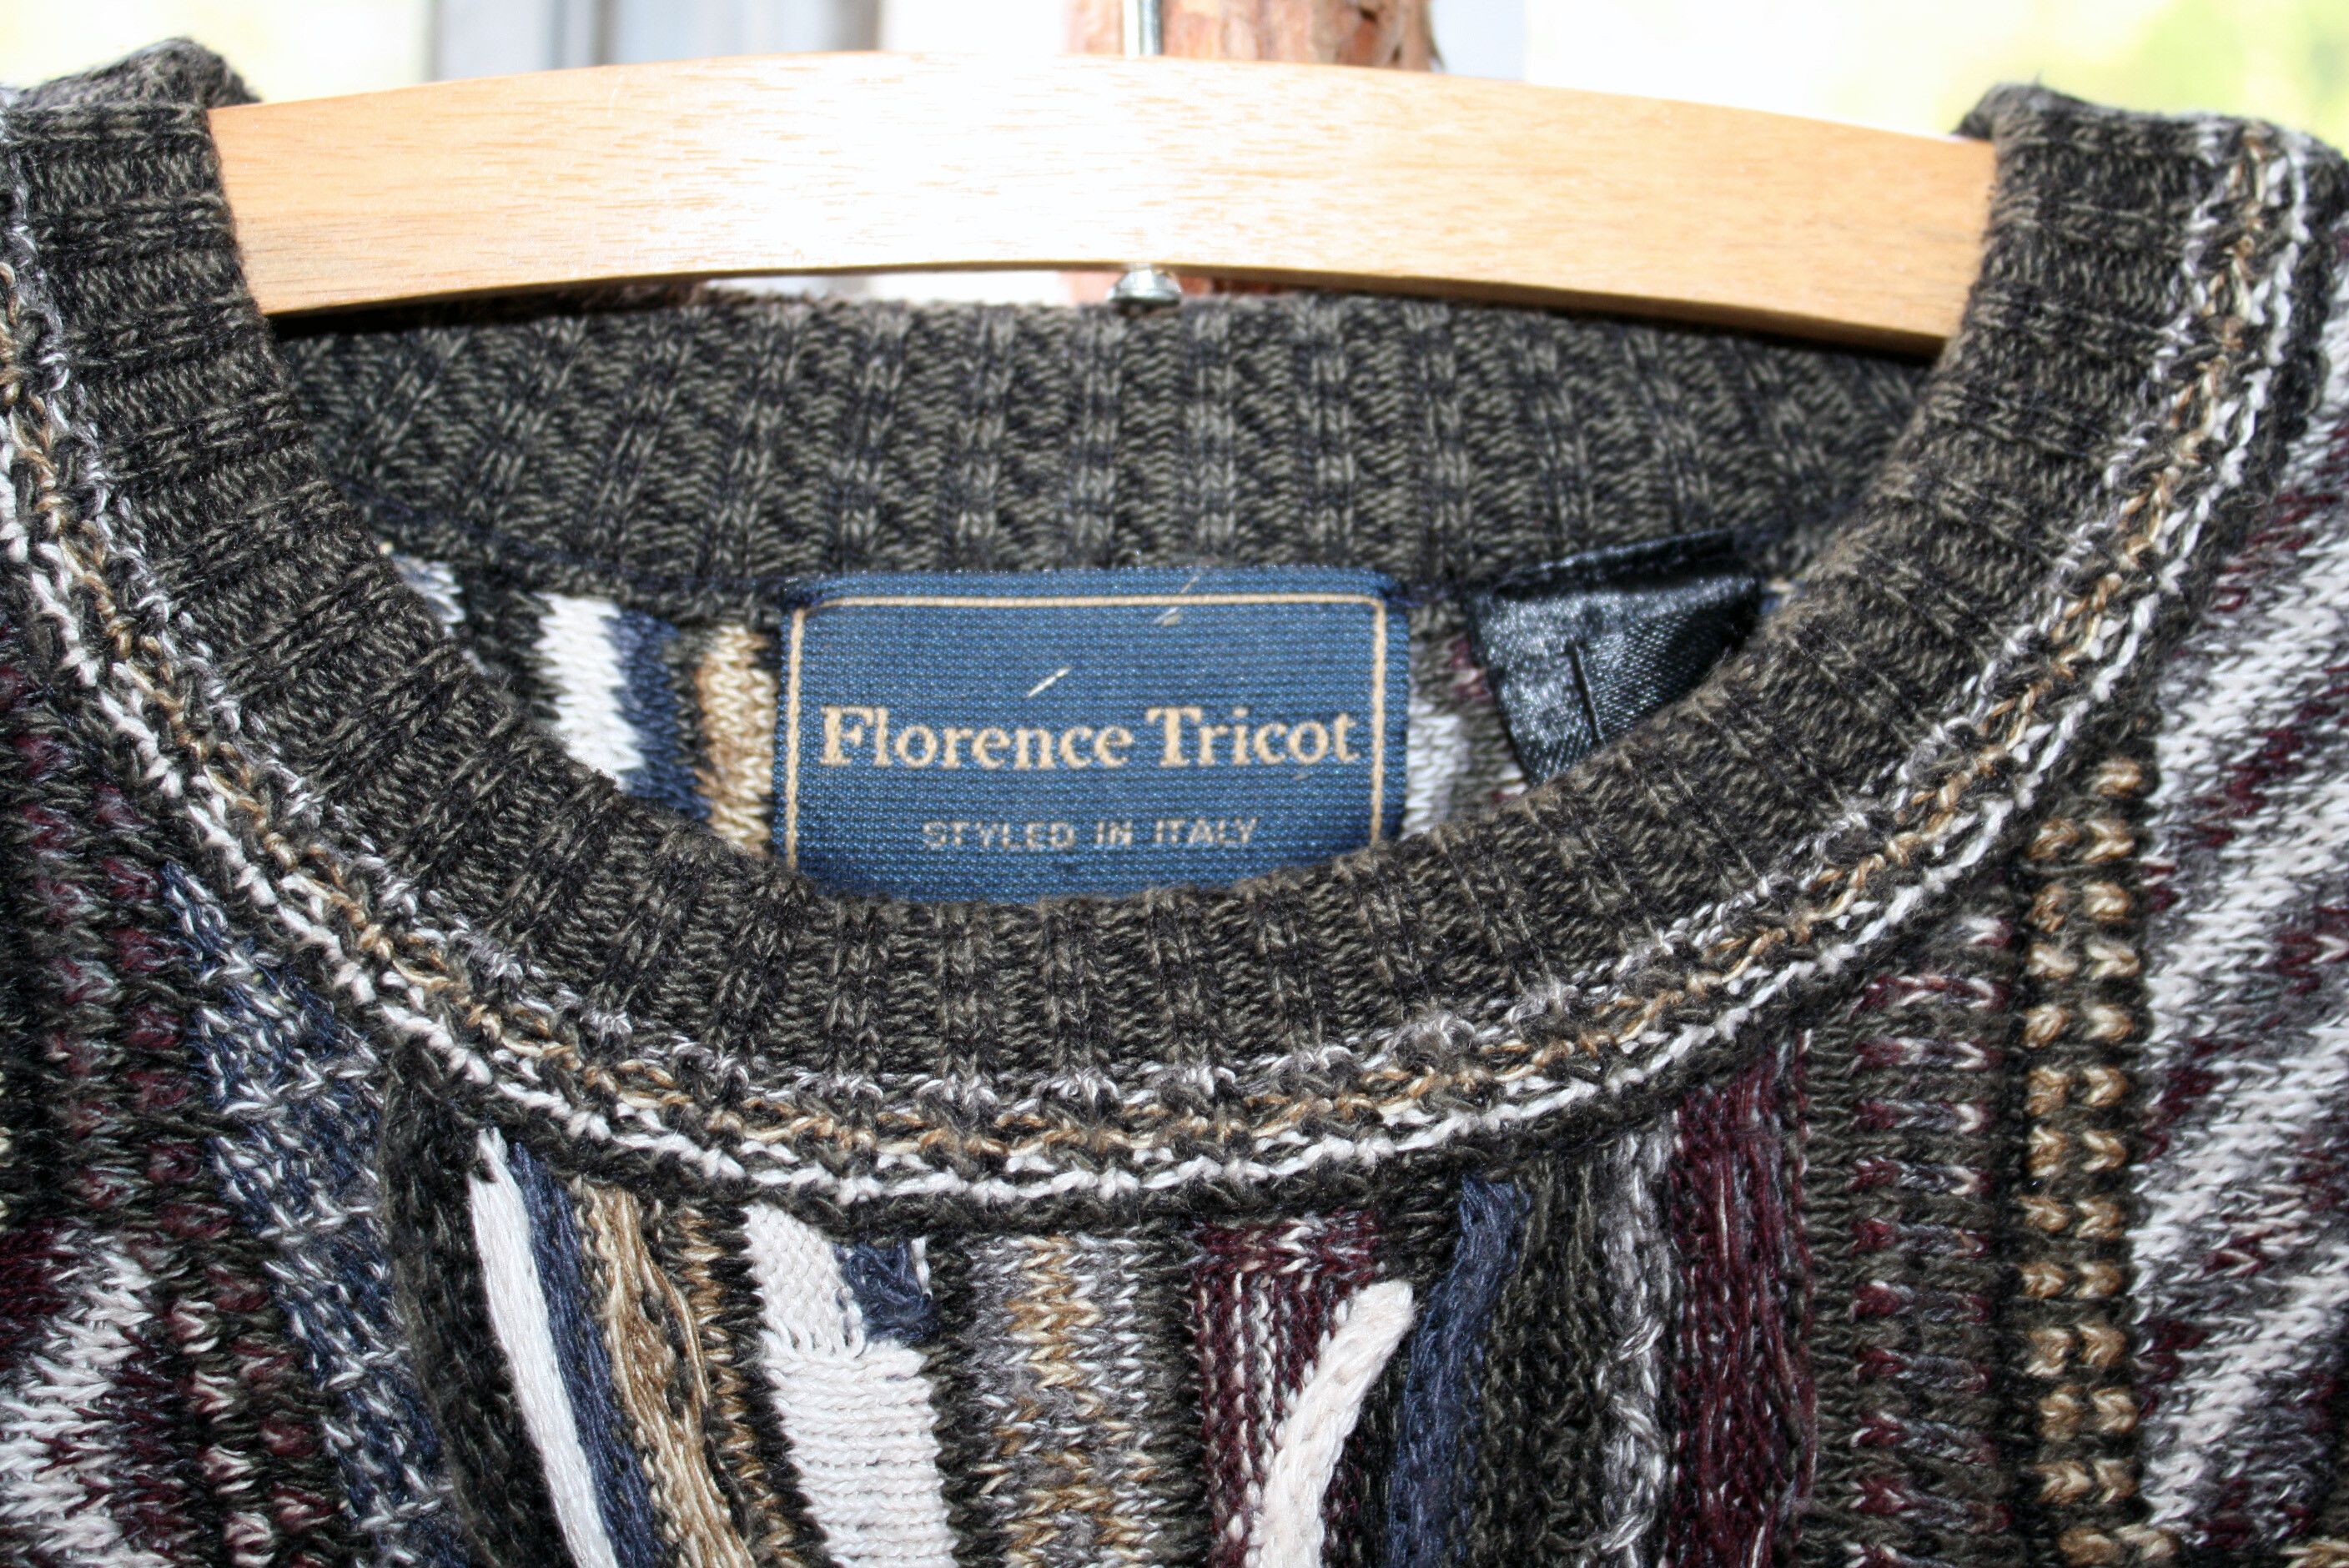 Florence Tricot Vintage Coogi Sweater Size US S / EU 44-46 / 1 - 5 Preview